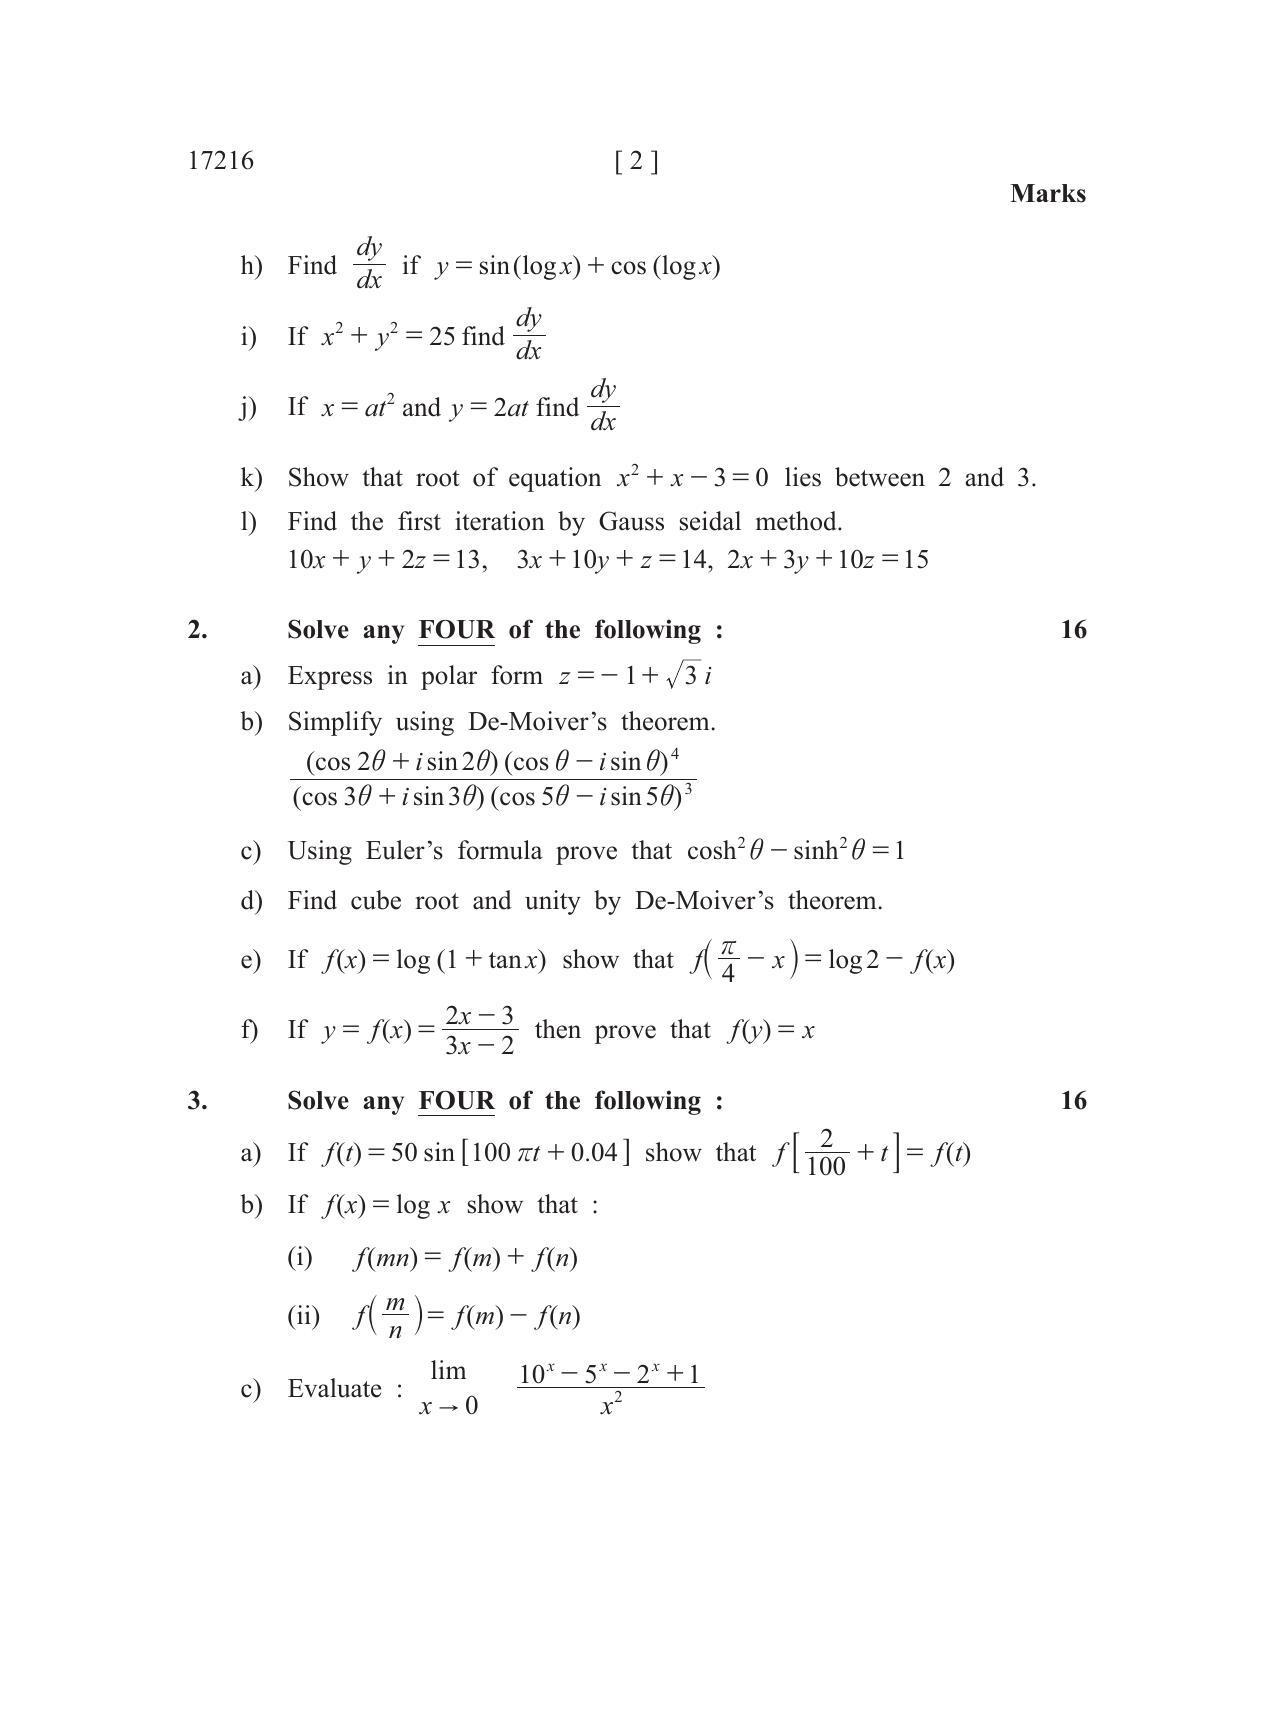 MSBTE Winter Question Paper 2019 - Engineering Mathematics - Page 2